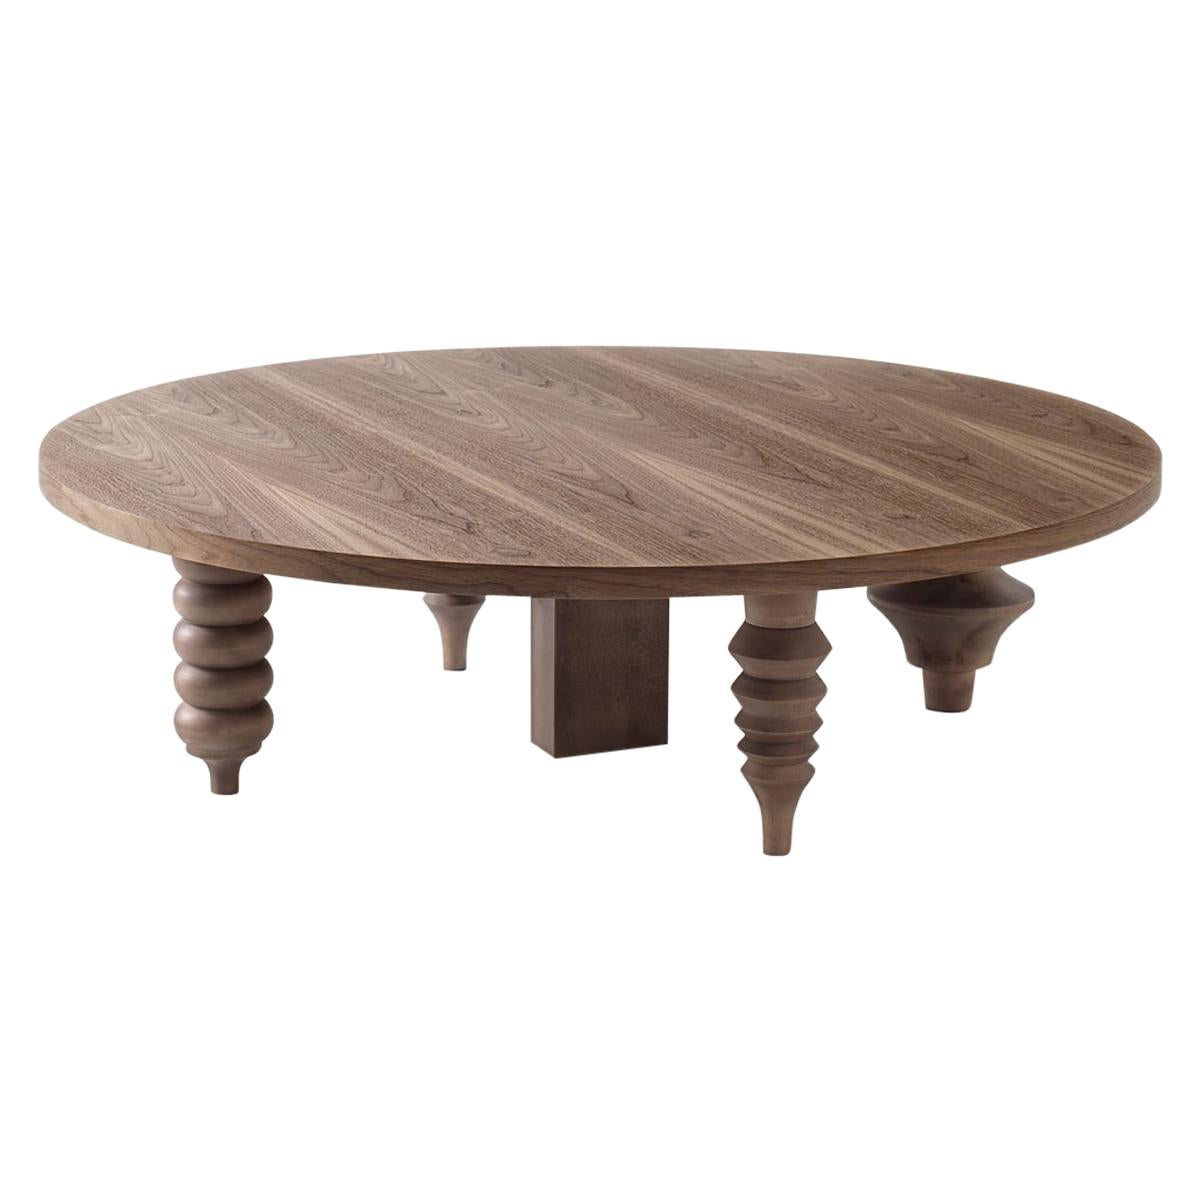 Round Multileg Low Coffee Table In Walnut Natural Wood Finish  Living room 